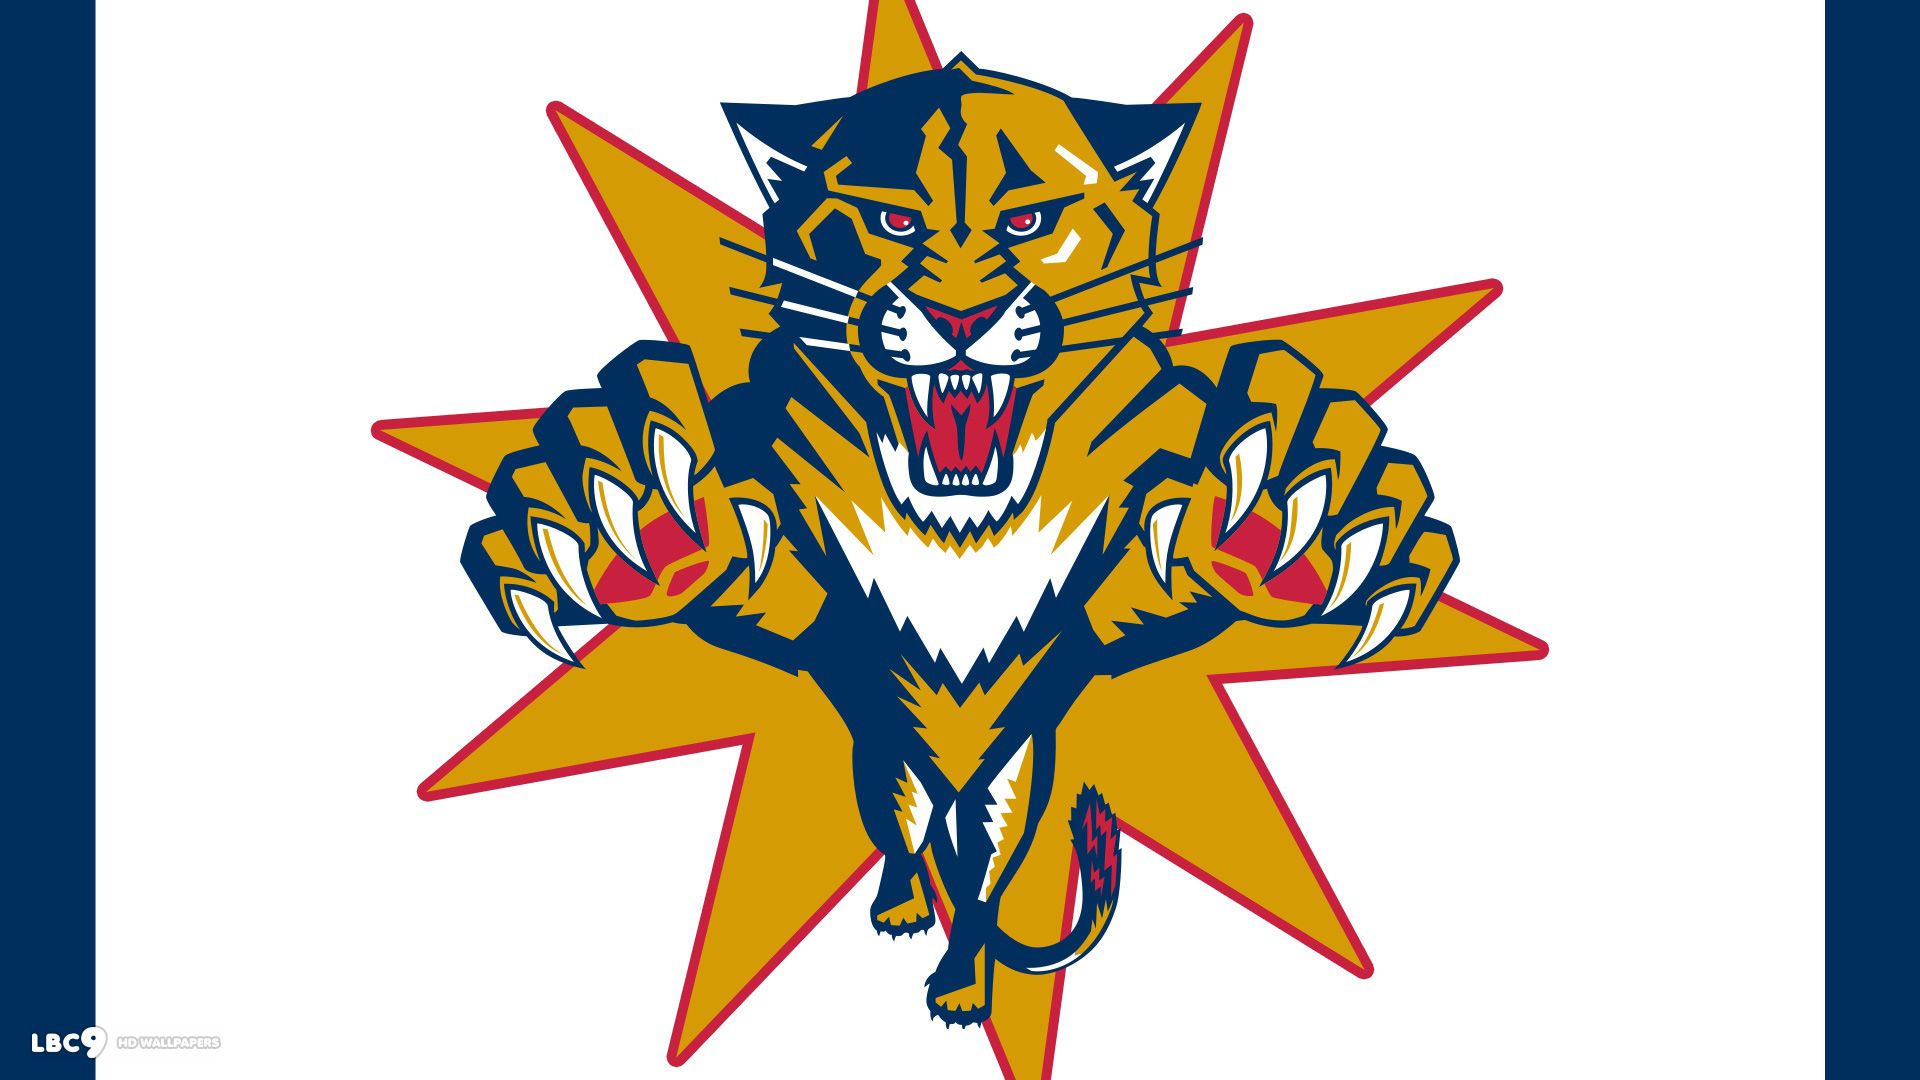 Florida panthers wallpaper 2 / 2 hockey teams hd backgrounds